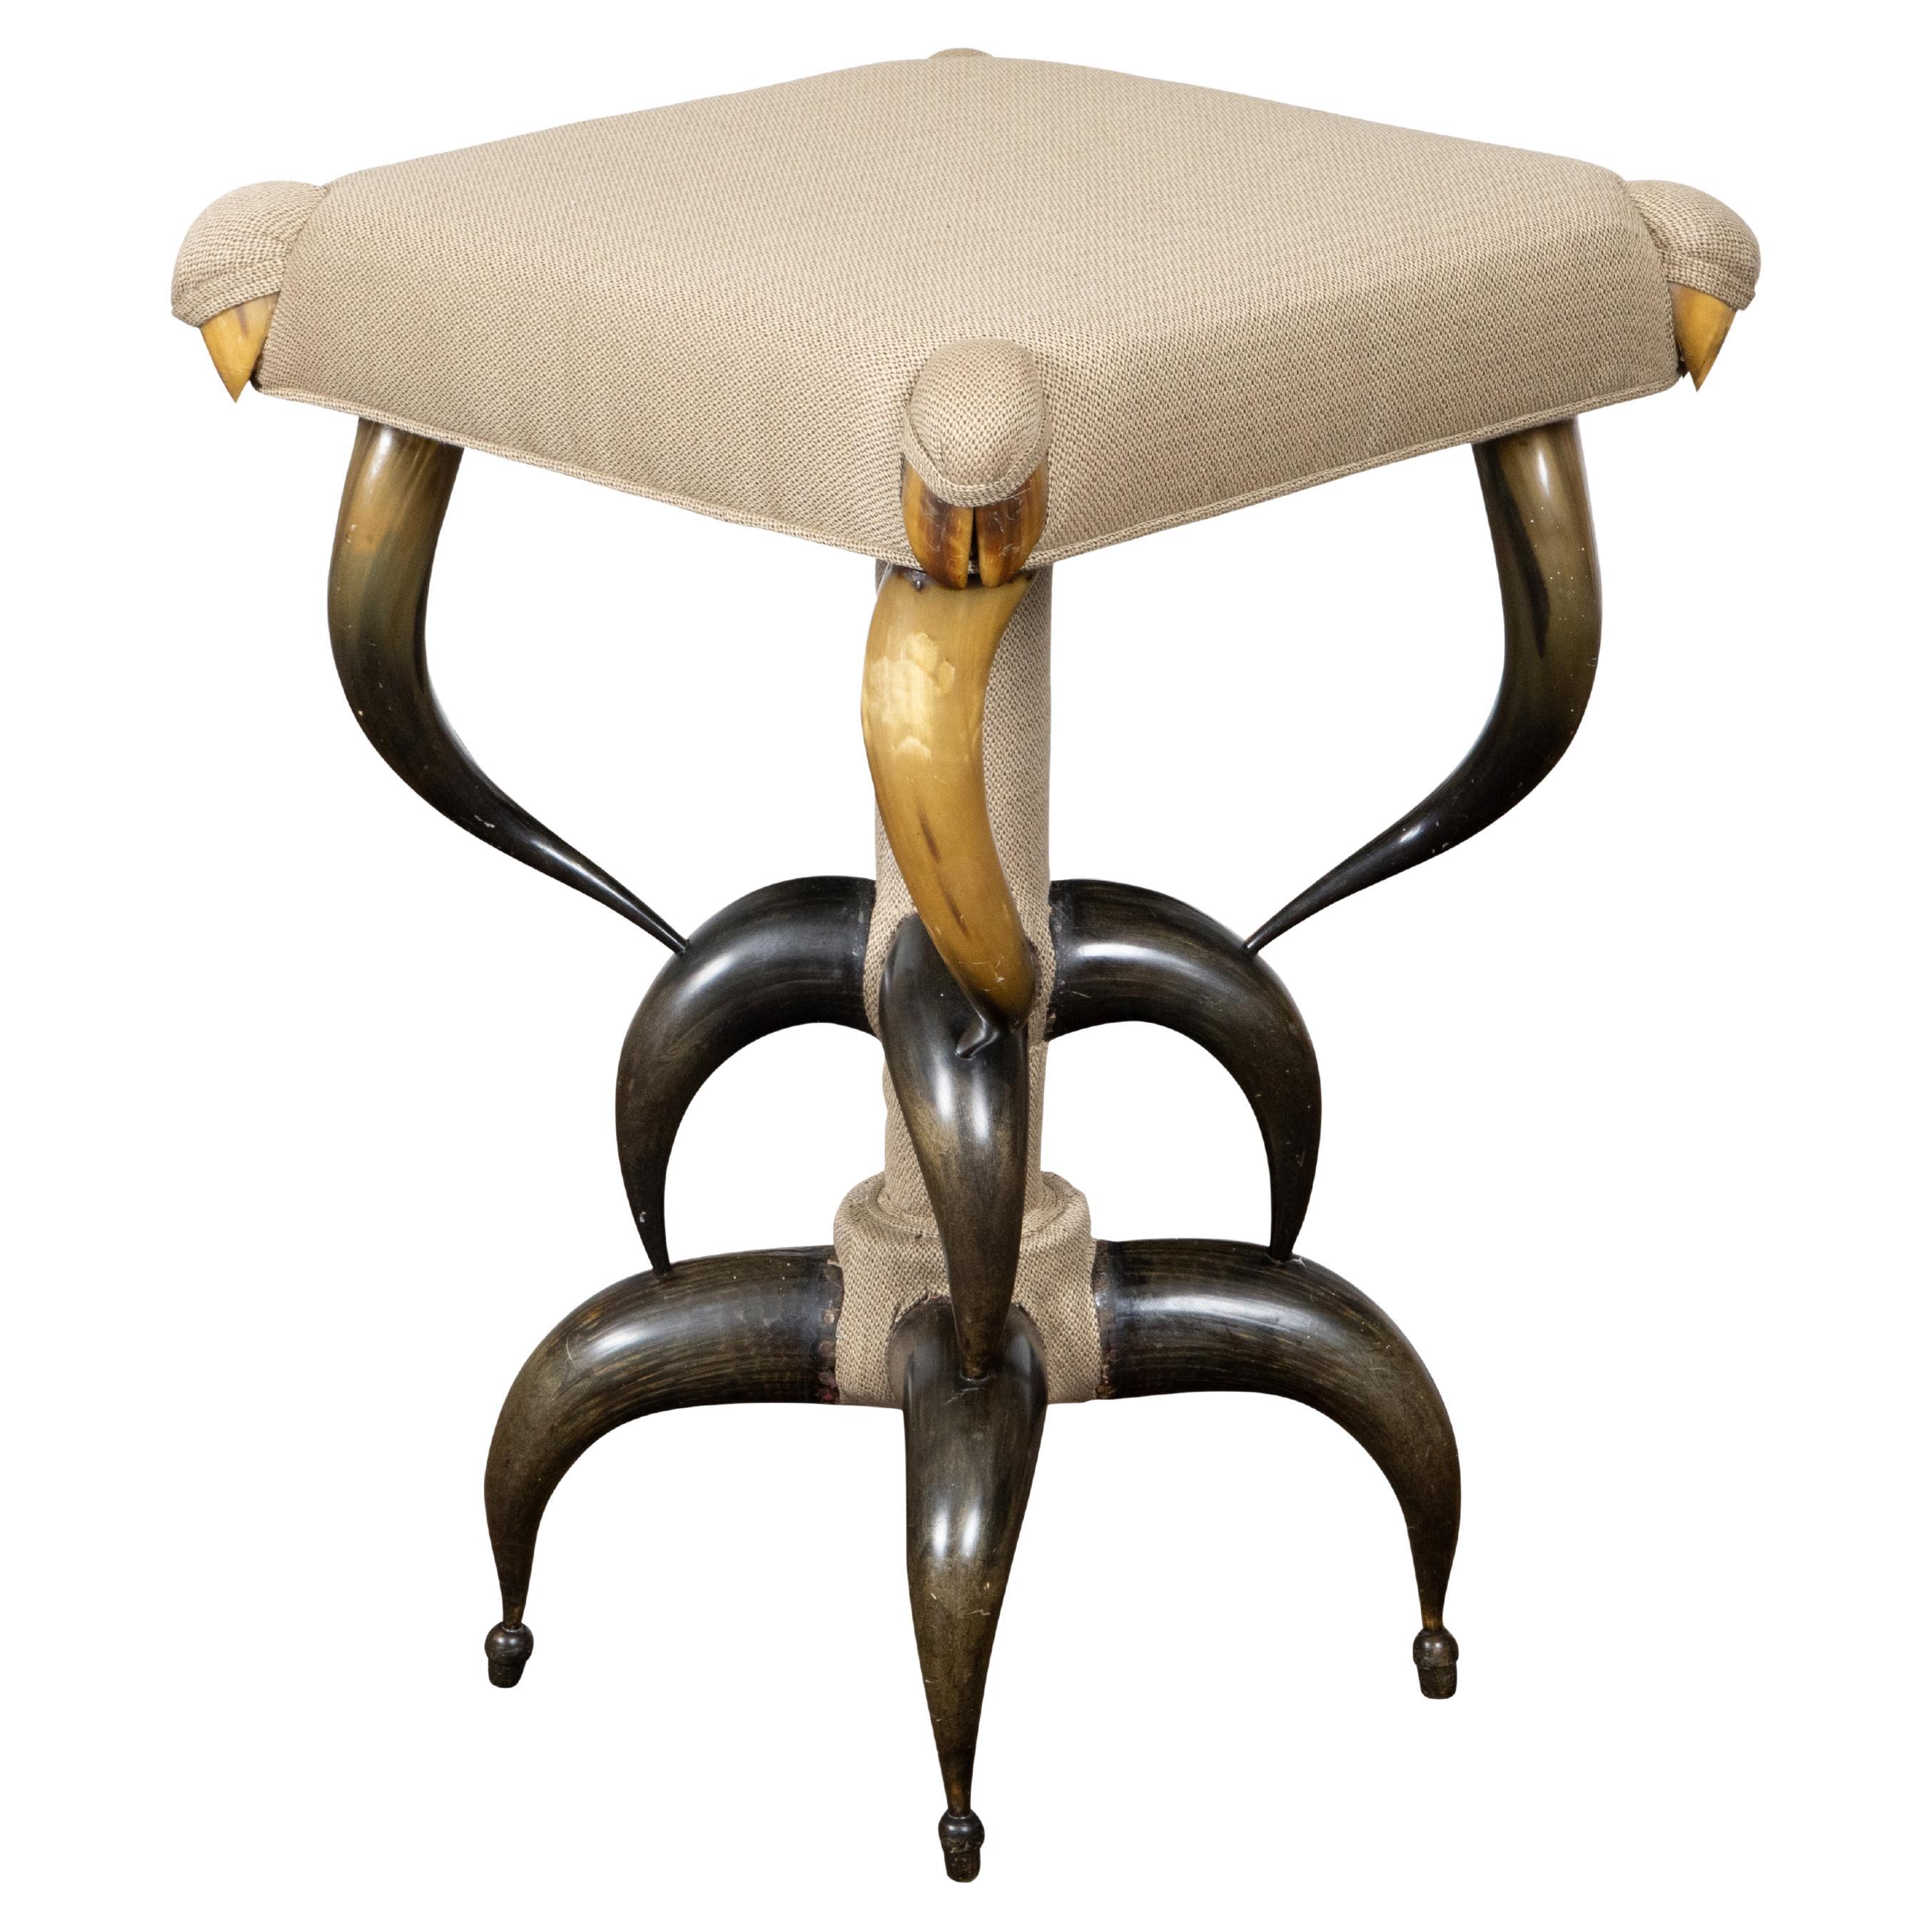 1880s American Horn Stool with Three-Tier Construction and Custom Upholstery